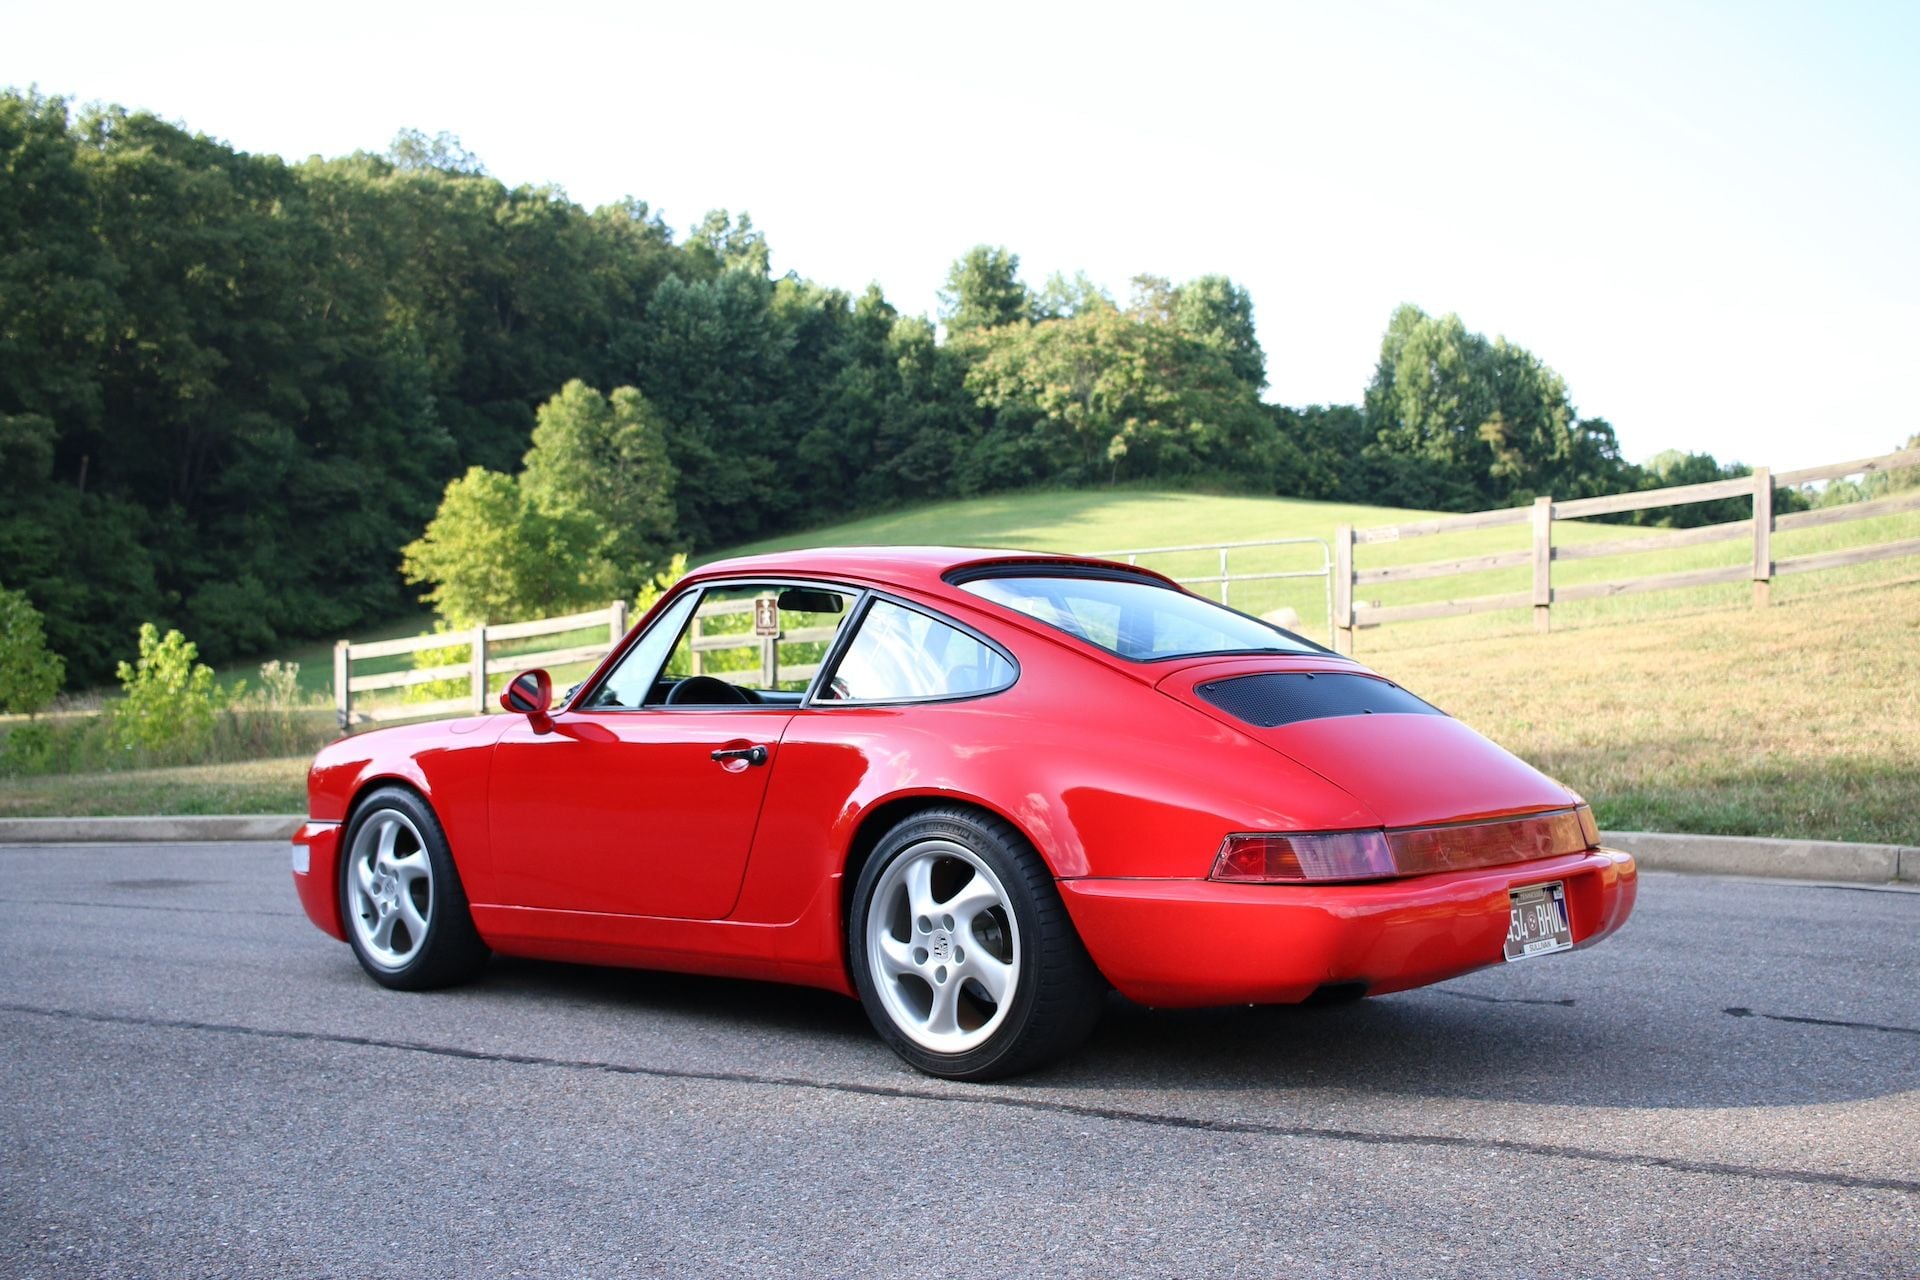 1979 Porsche 911 - Modified 1979 Porsche 911 SC - Used - VIN 9119200514 - 219,800 Miles - 6 cyl - 2WD - Manual - Coupe - Red - Kingsport, TN 37663, United States